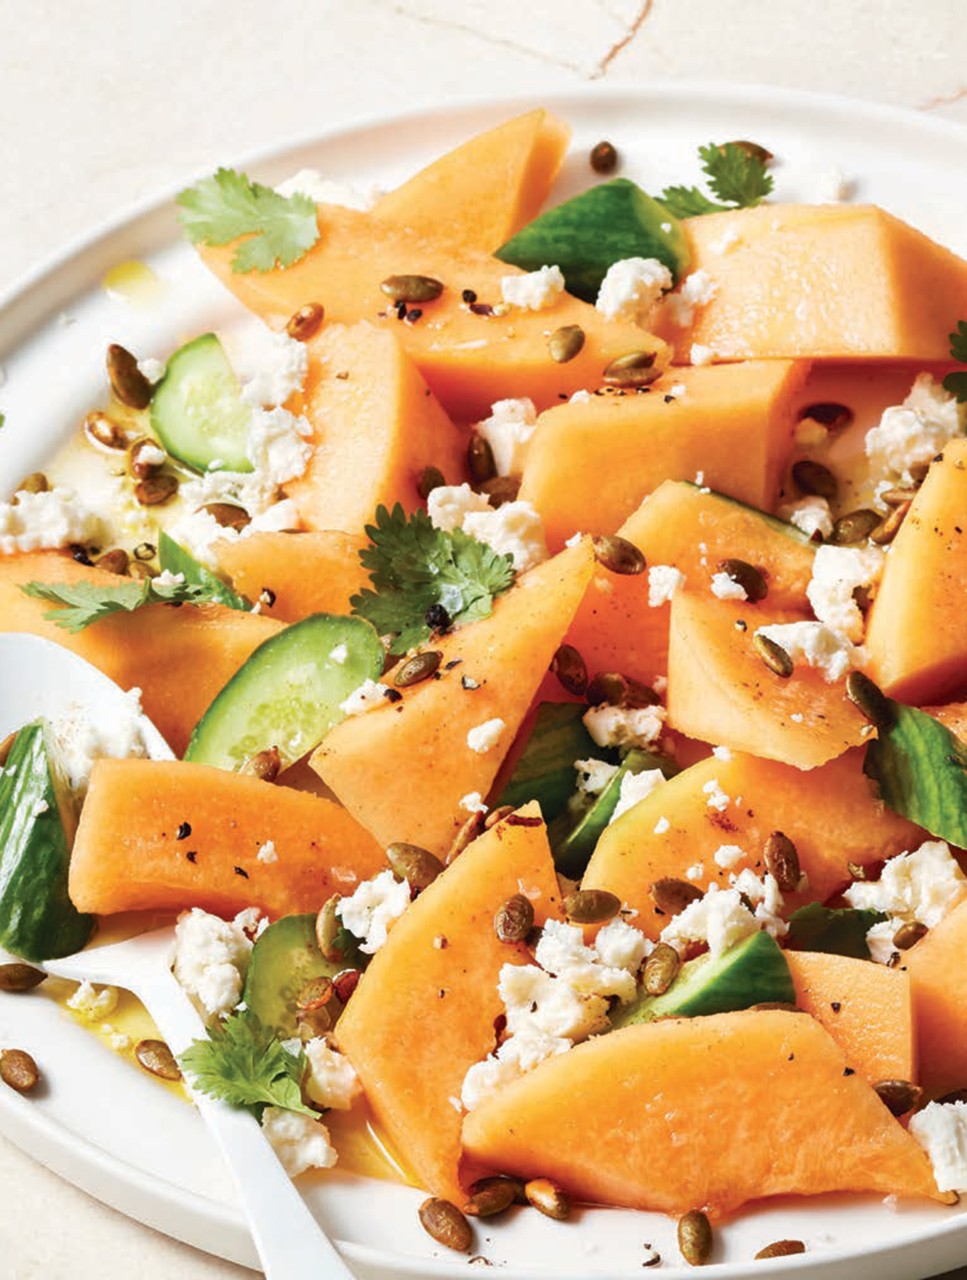 Cantaloupe & Cucumber Salad with Queso Fresco & Spiced Pepitas